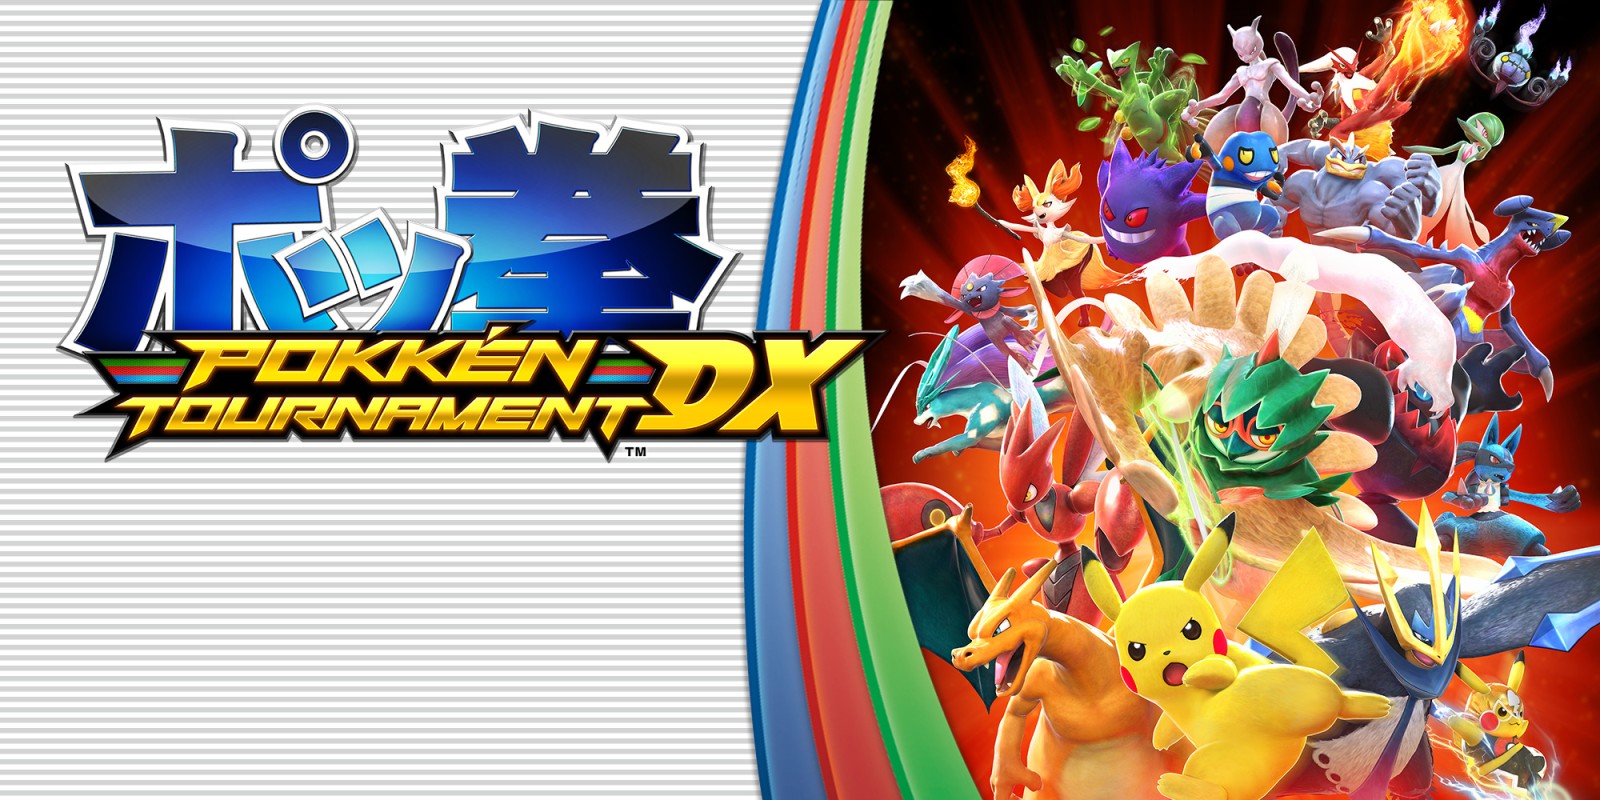 Pokken Tournament PC Download free full game for windows